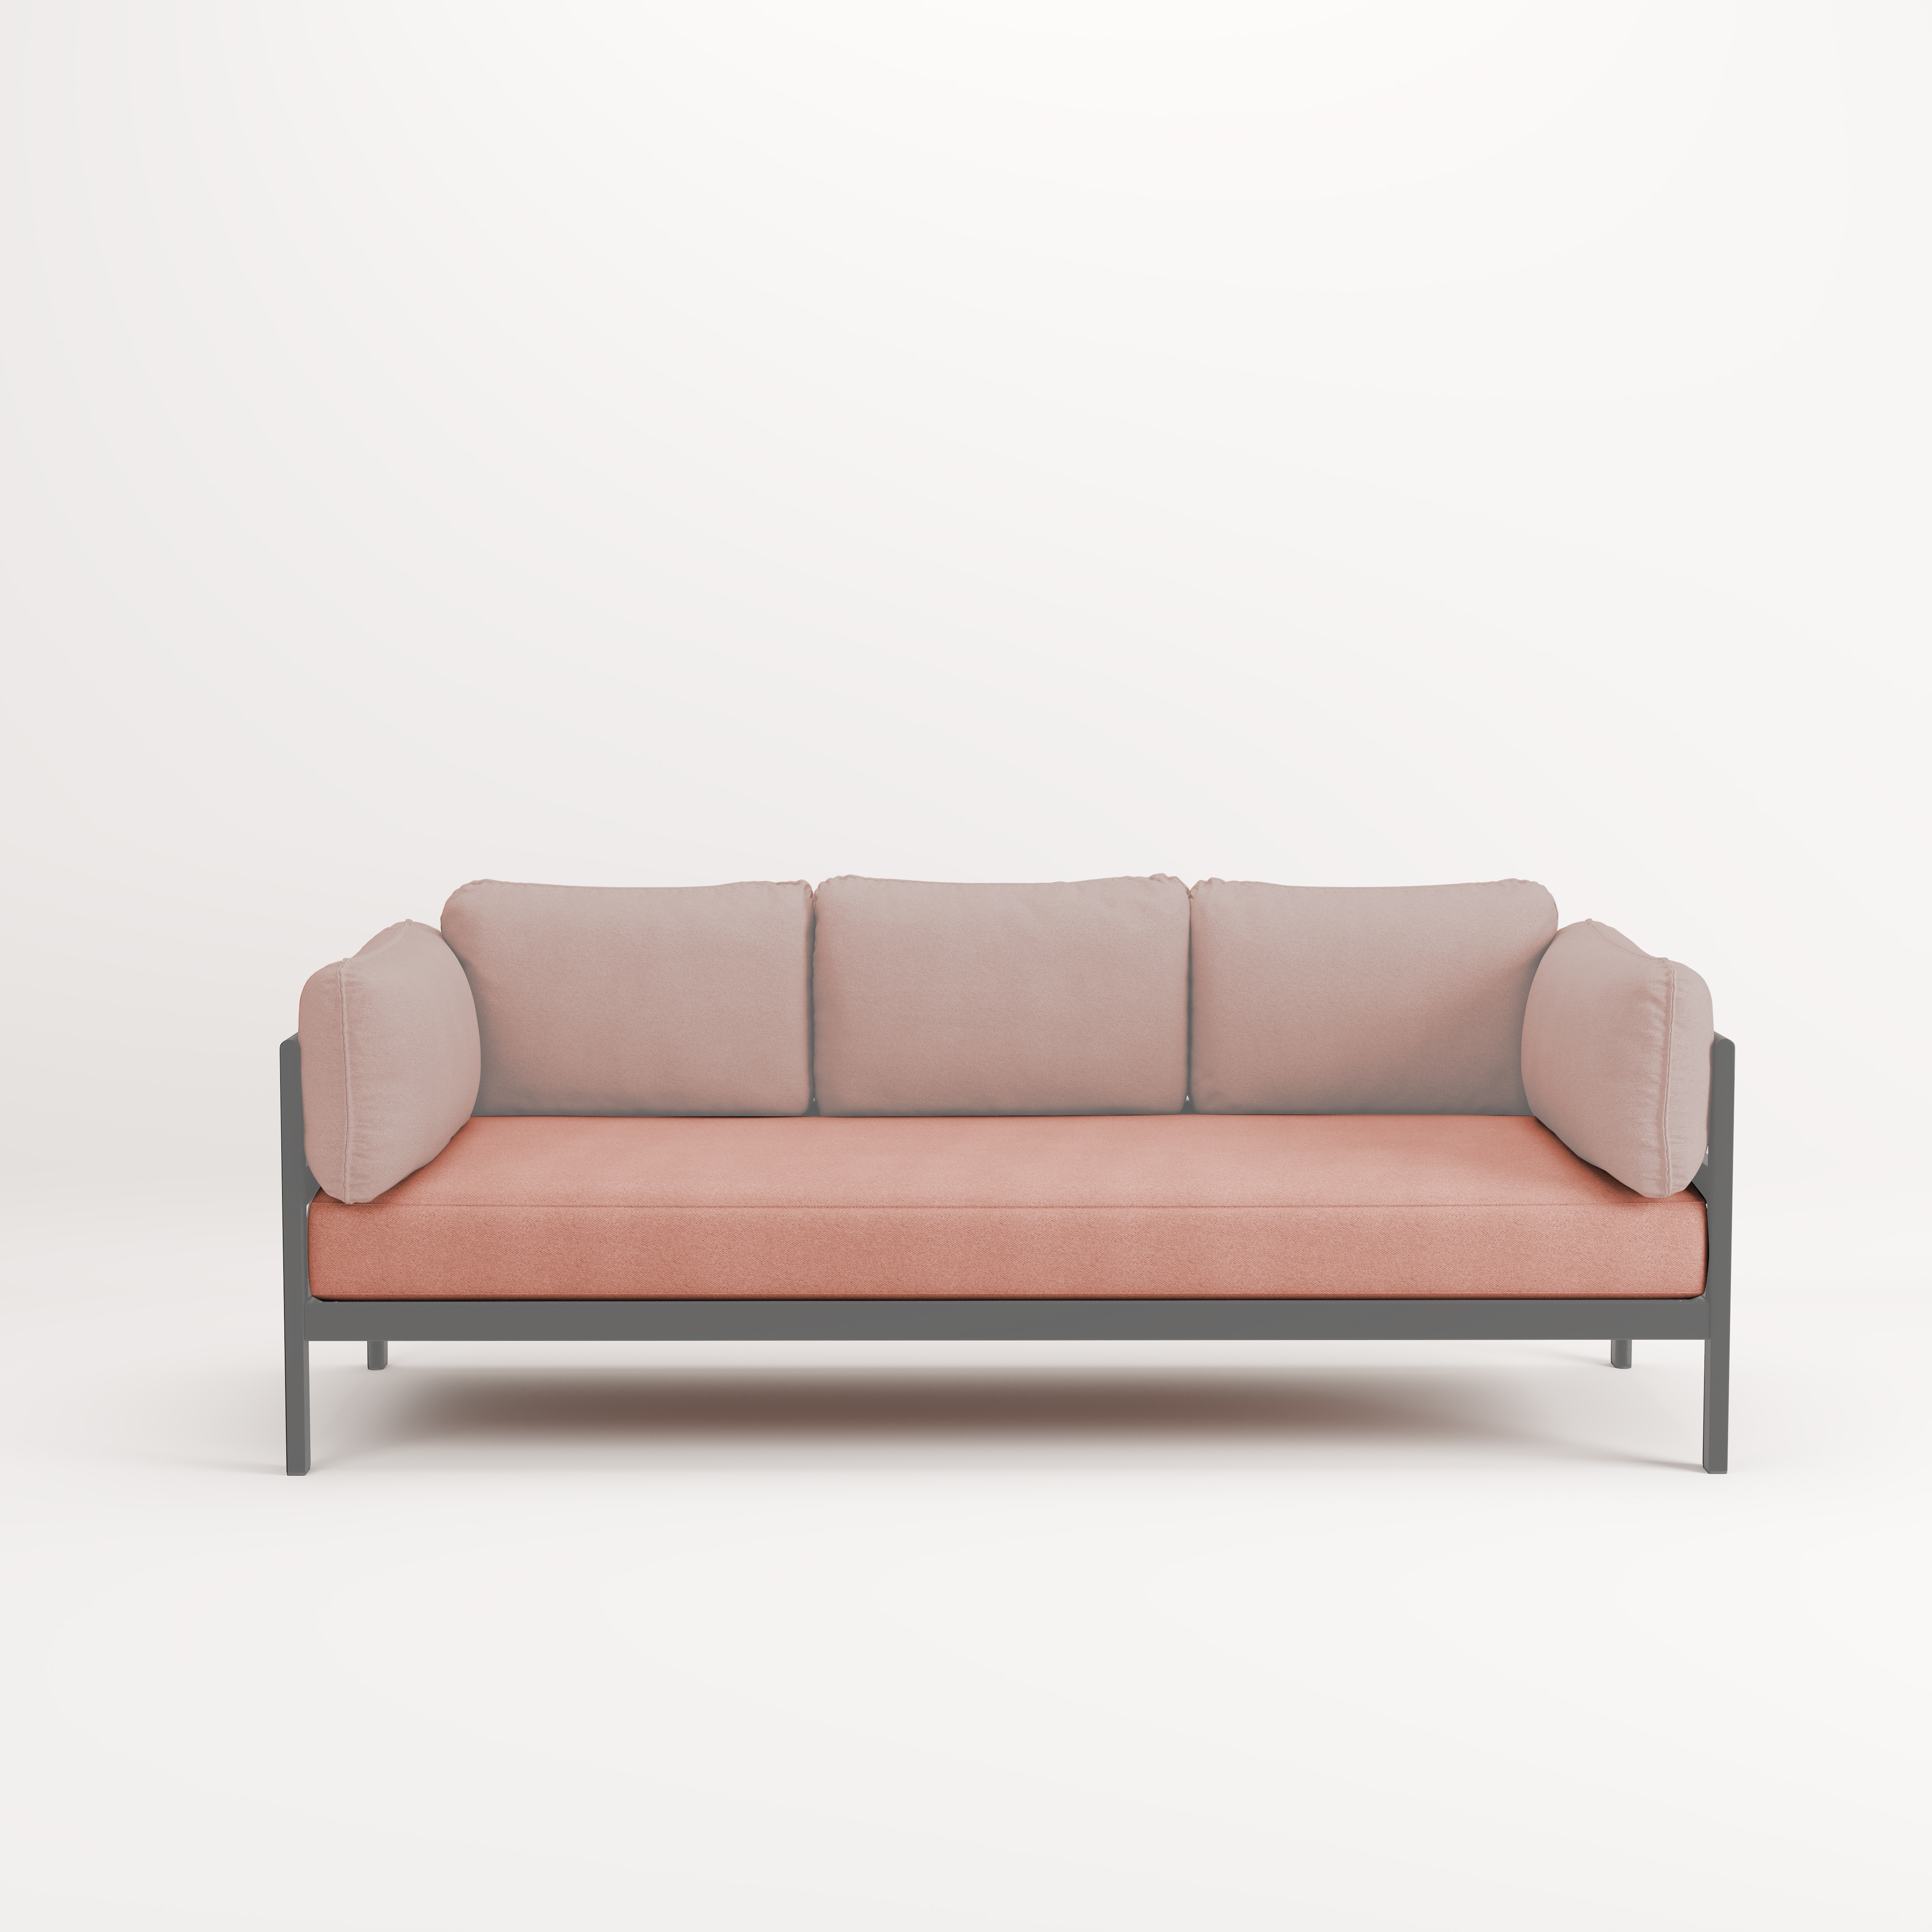 Individual cover for EASY sofa